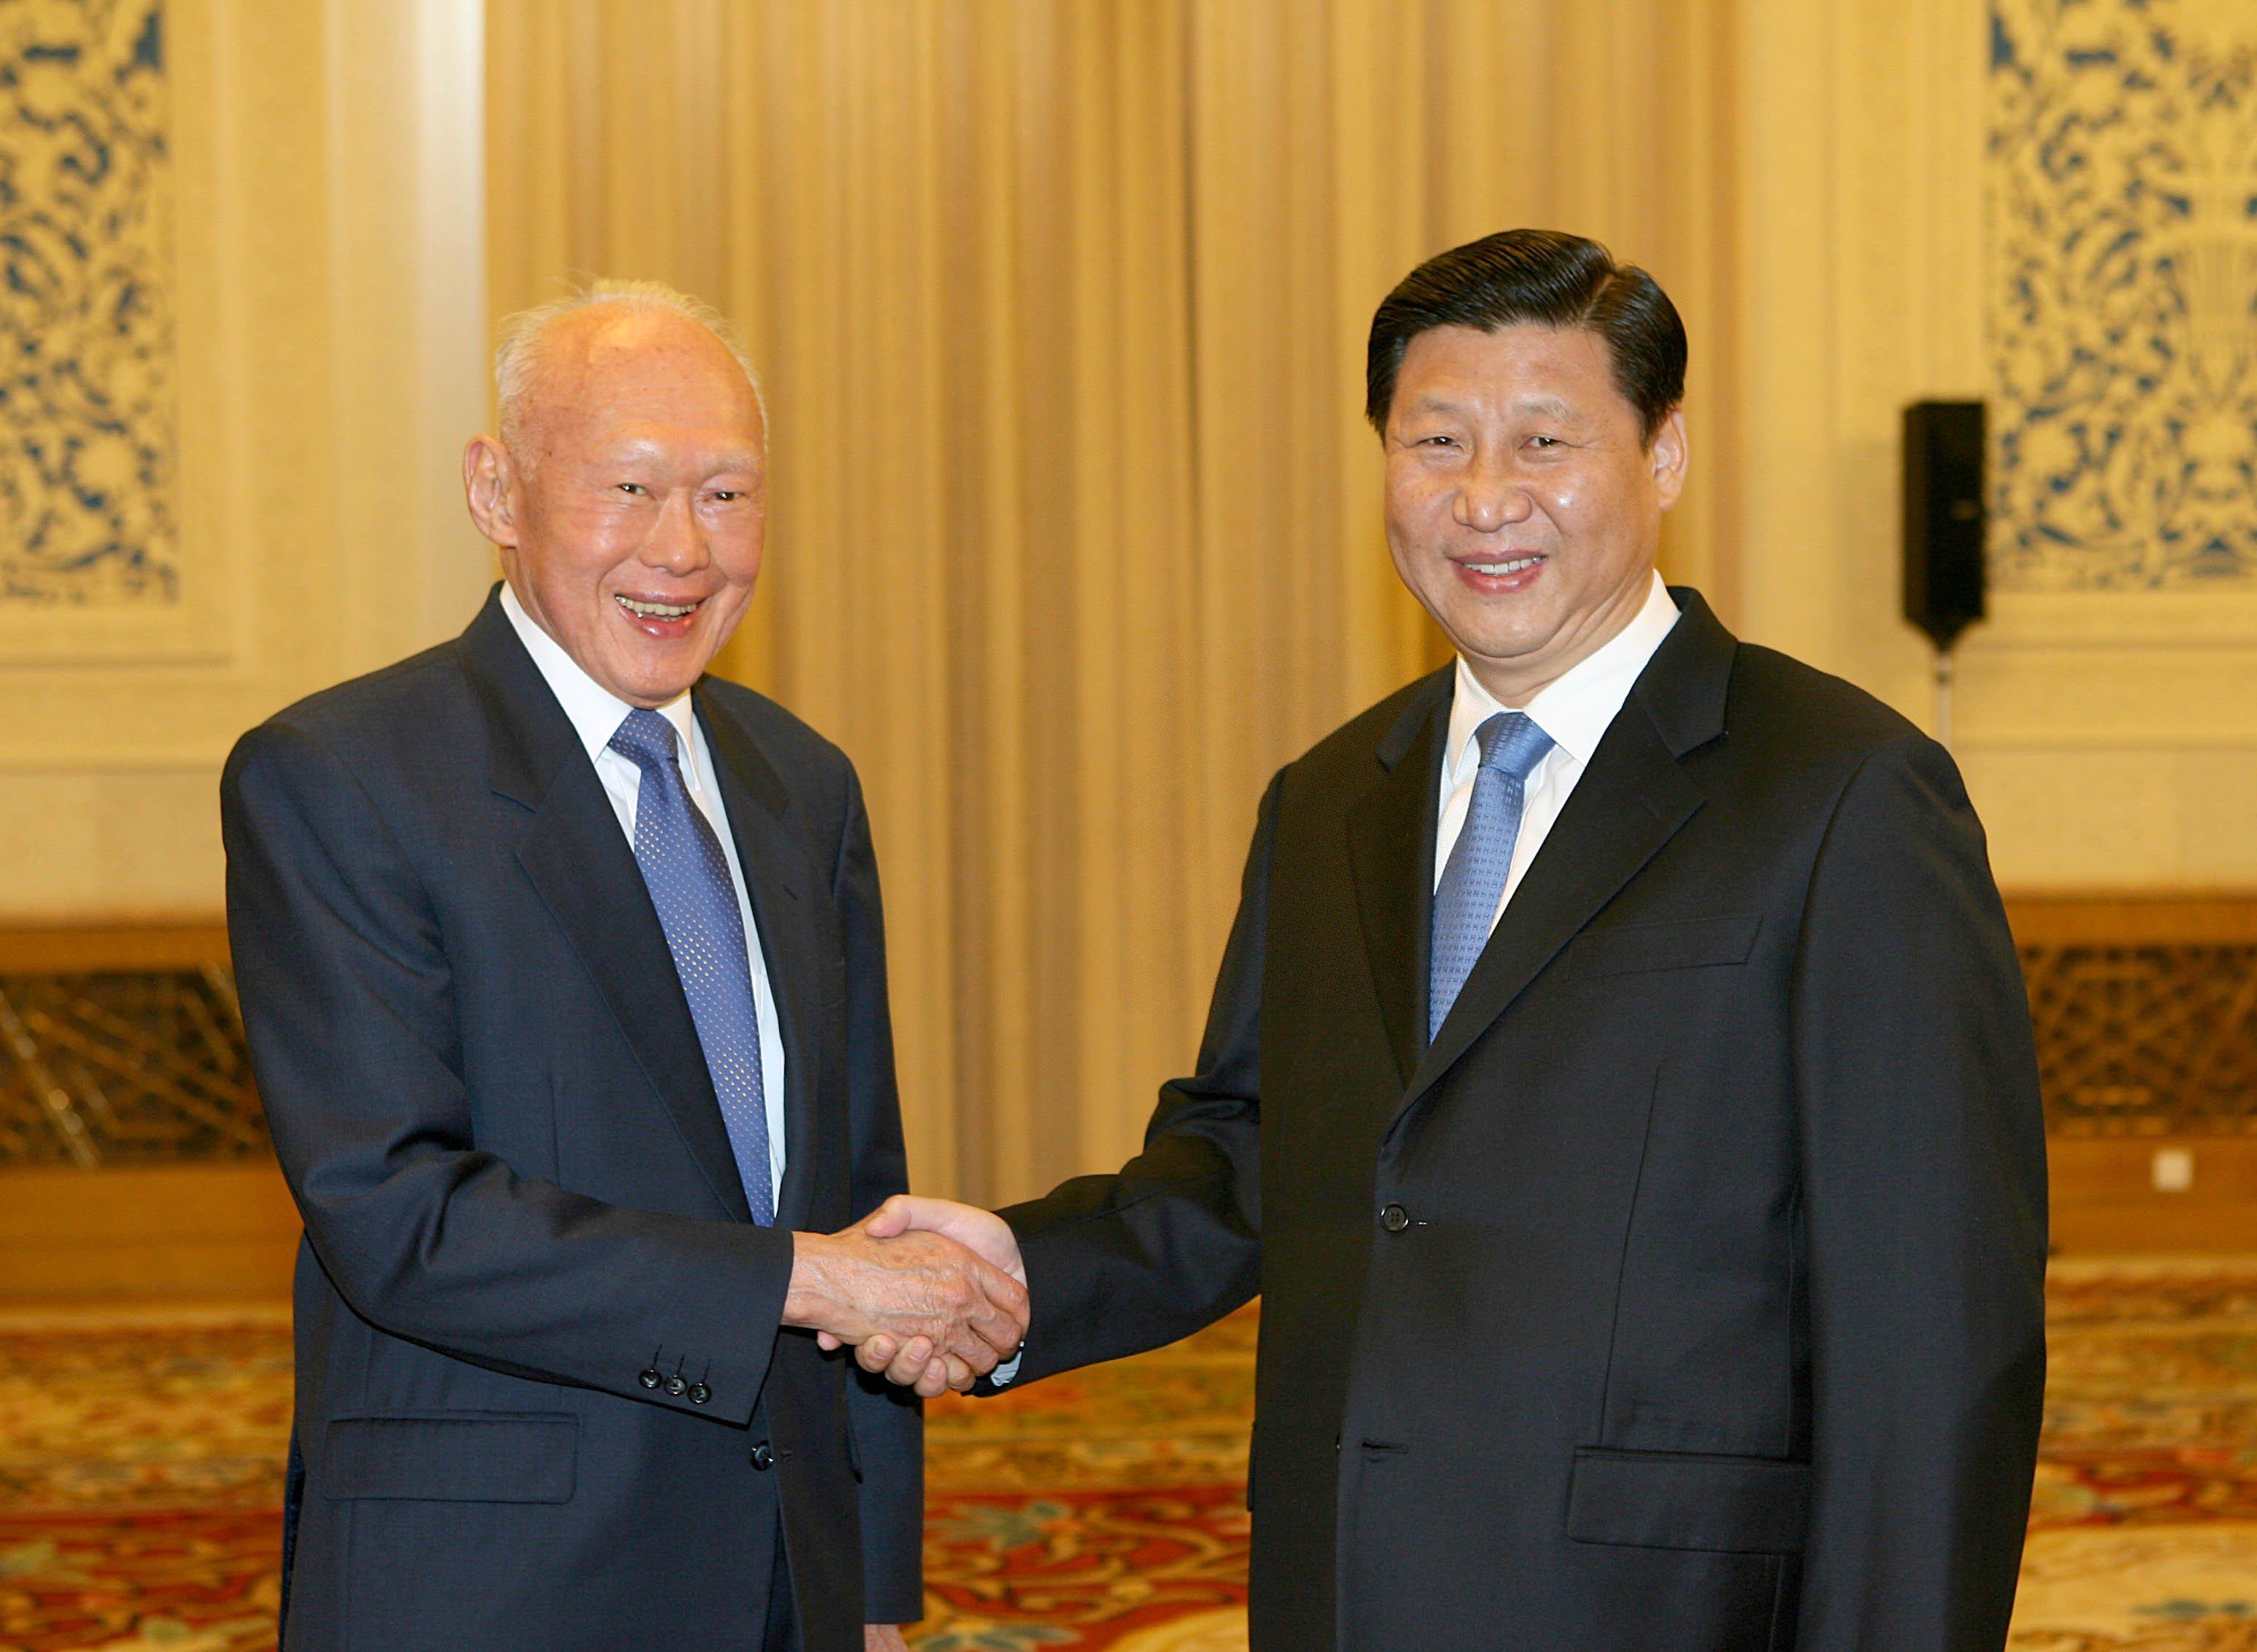 Singapore’s former prime minister Lee Kuan Yew with Chinese President Xi Jinping at the Great Hall of the People in Beijing in November 2007. Photo: Xinhua